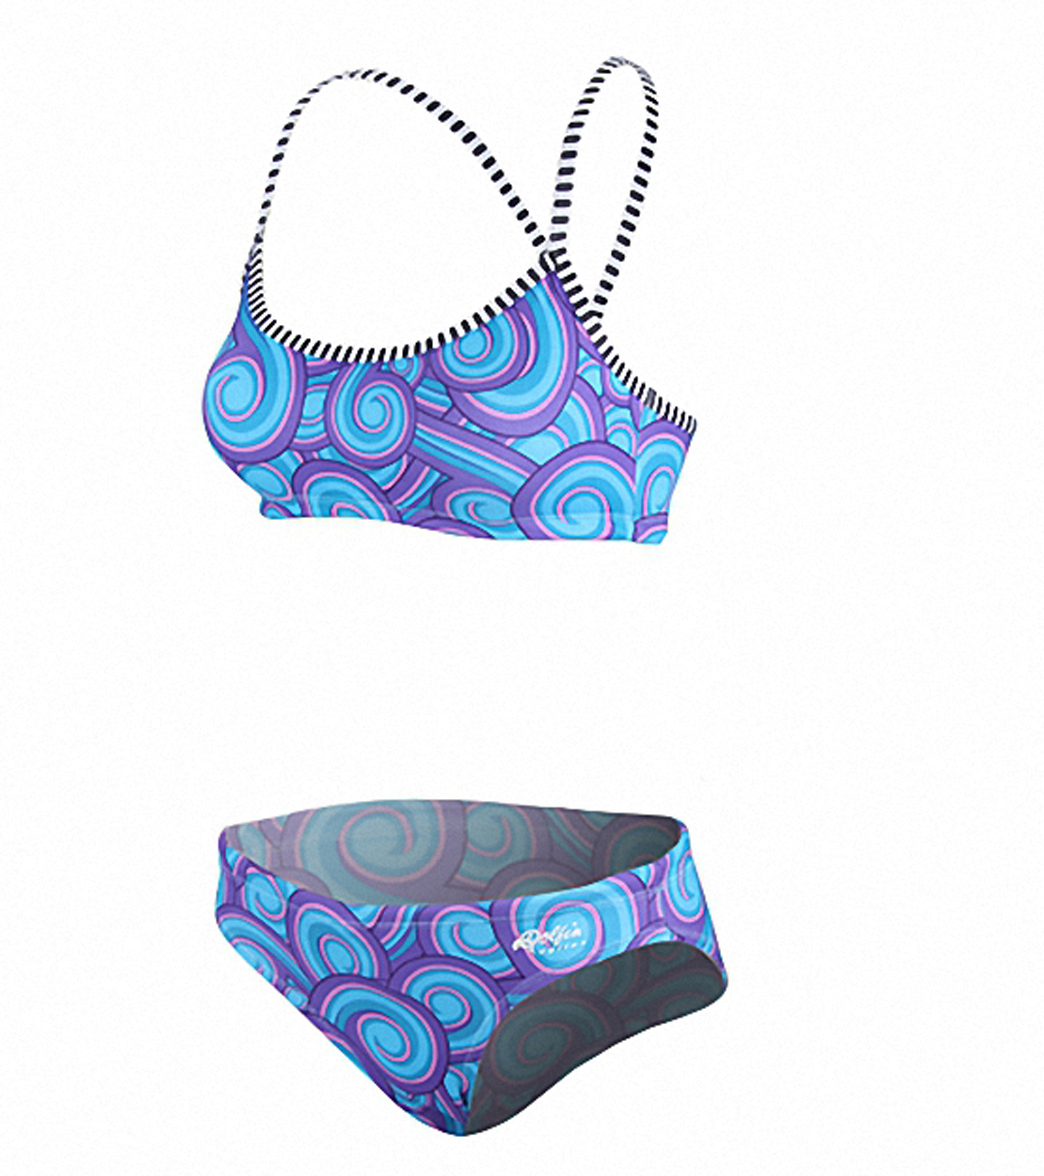 Dolfin Uglies Doodle Workout Two Piece Swimsuit at SwimOutlet.com